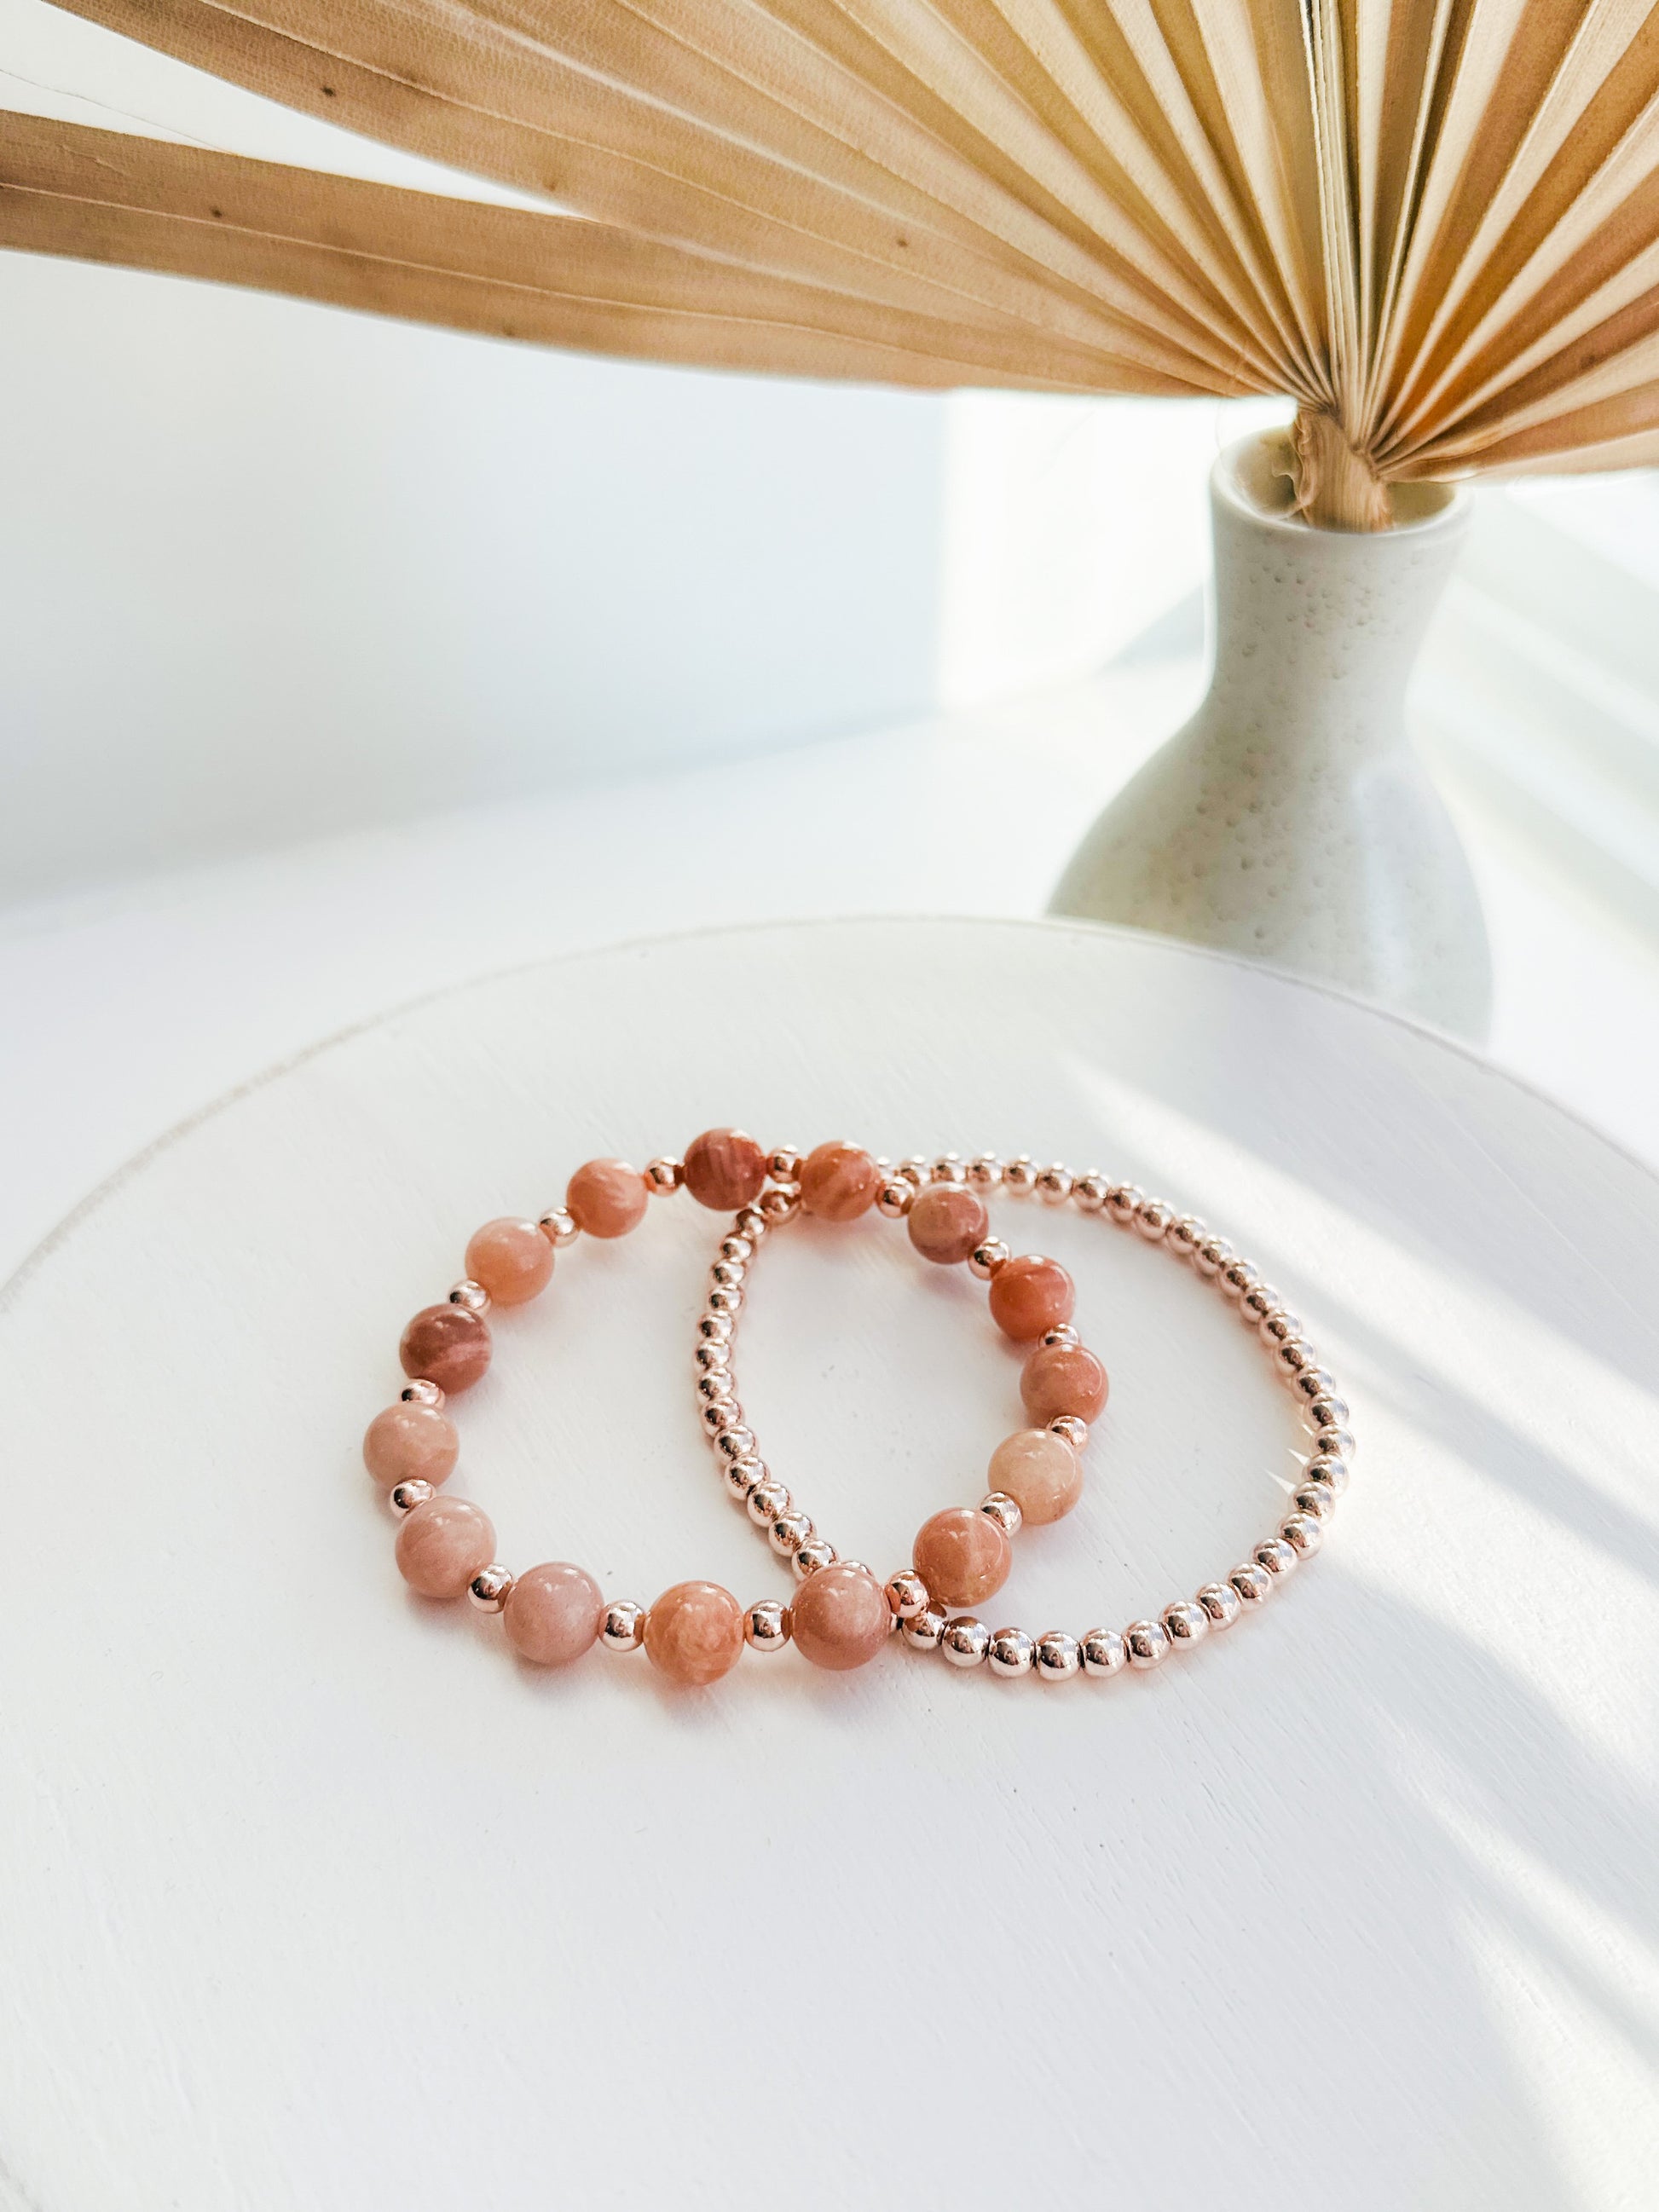 Introducing our exquisite gemstone bracelet set, crafted with the powerful energies of Sunstone and the elegance of Rose Gold Hematite.

Sunstone, known for its radiant warmth, promotes joy, vitality, and personal power. Complementing this, Rose Gold Hematite is believed to bring balance, grounding, and a sense of tranquility.

